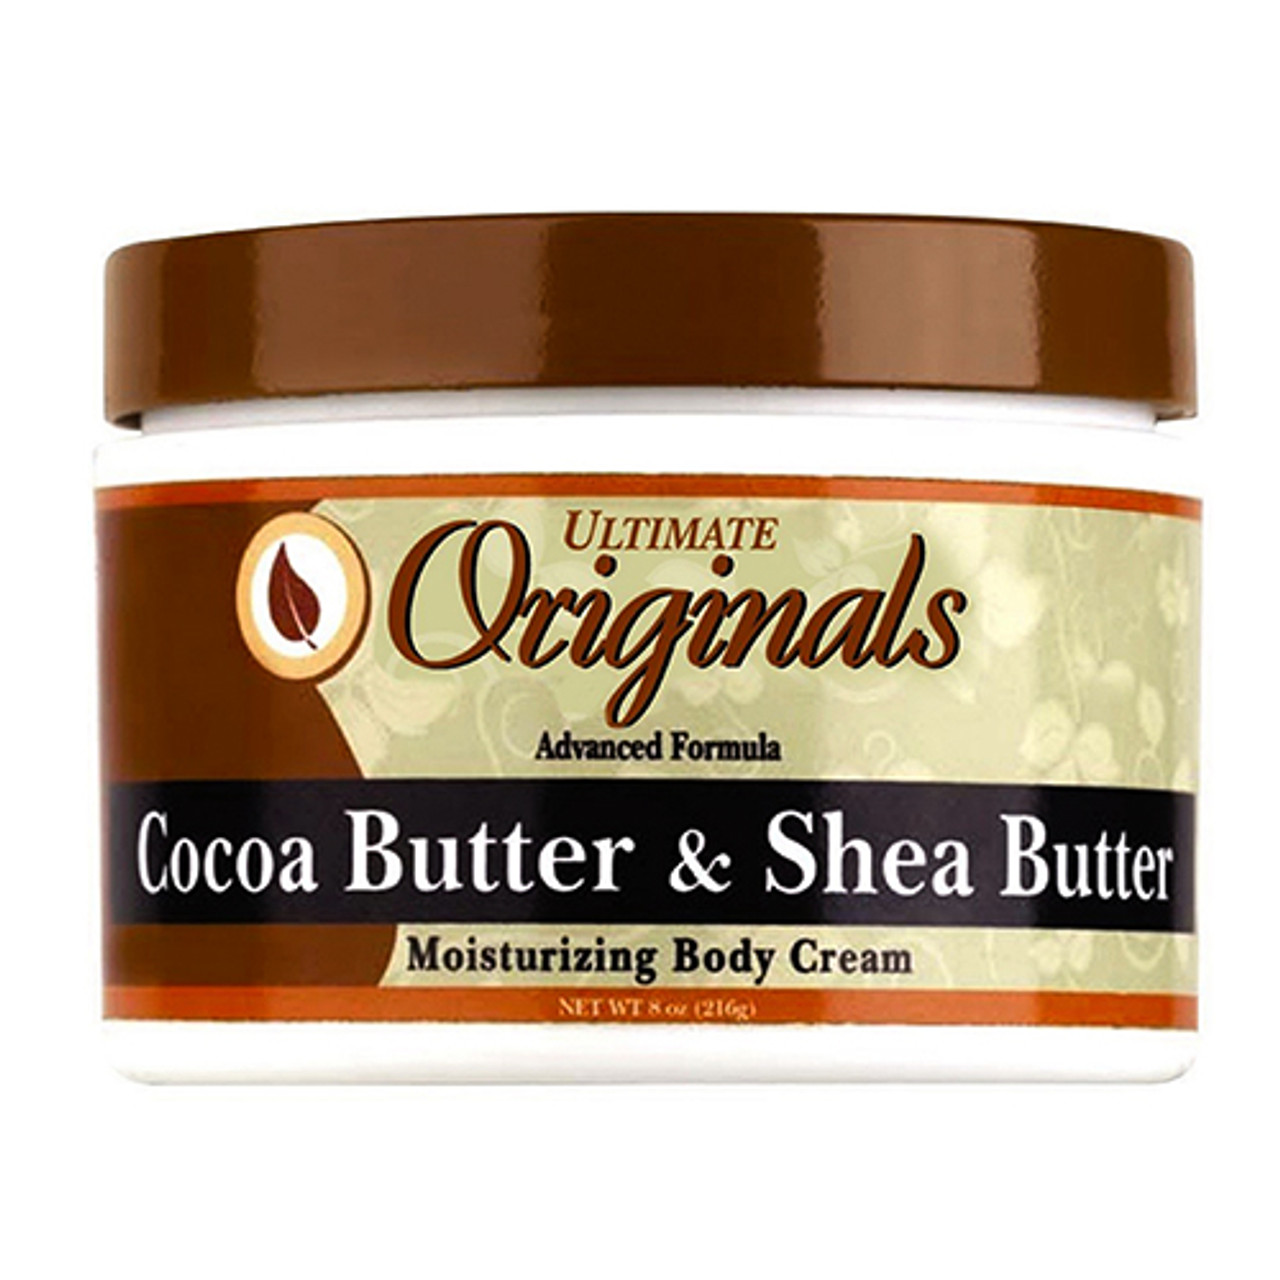 Ultimate Organic Cocoa Butter And Shea Butter Body Cream By Africas